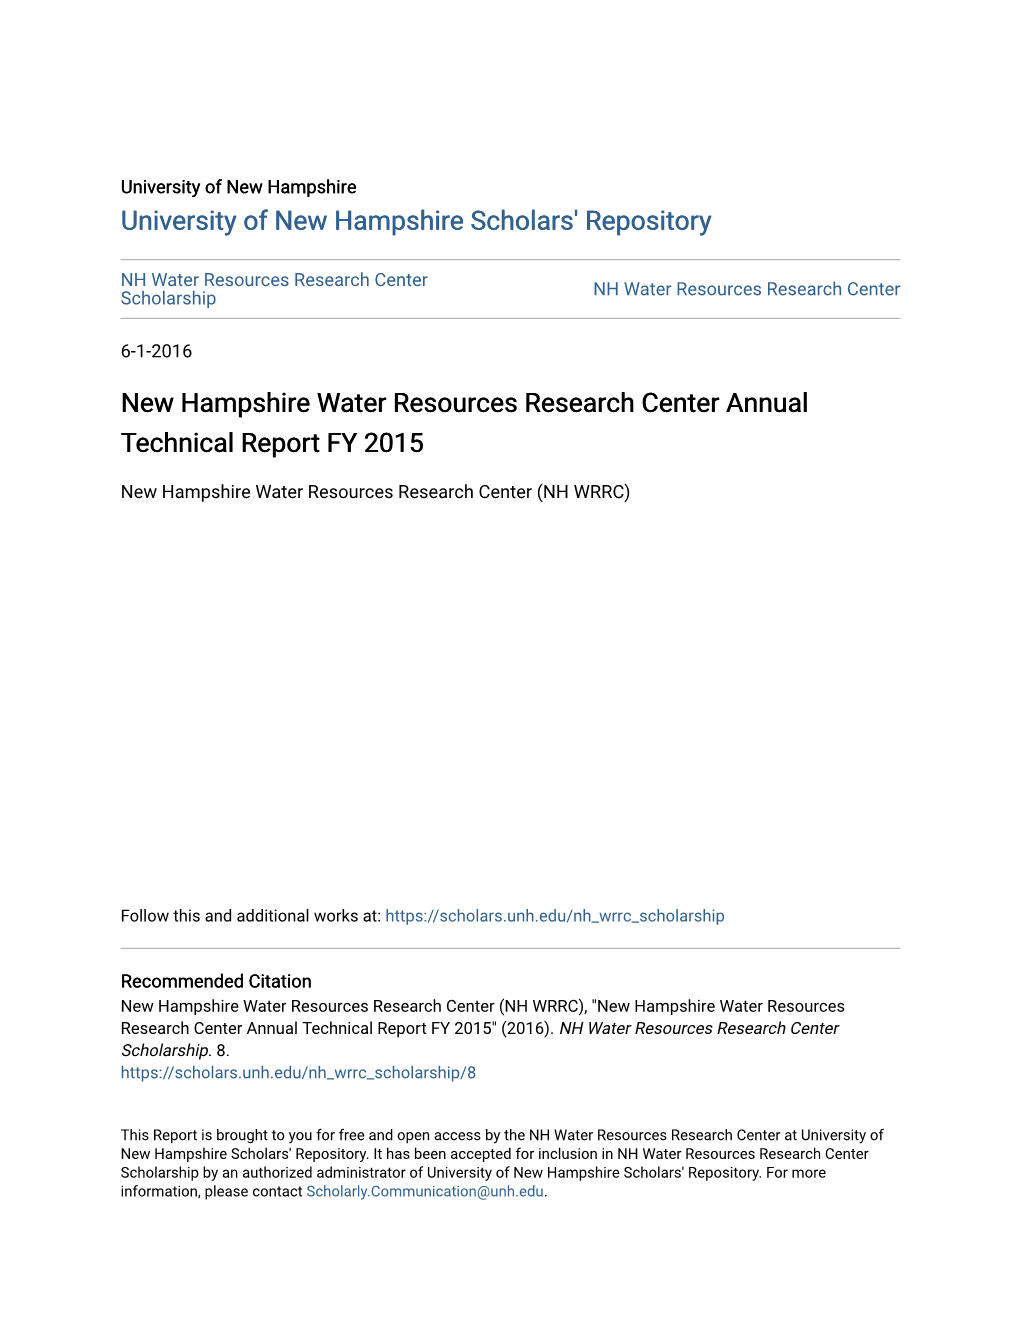 New Hampshire Water Resources Research Center Annual Technical Report FY 2015